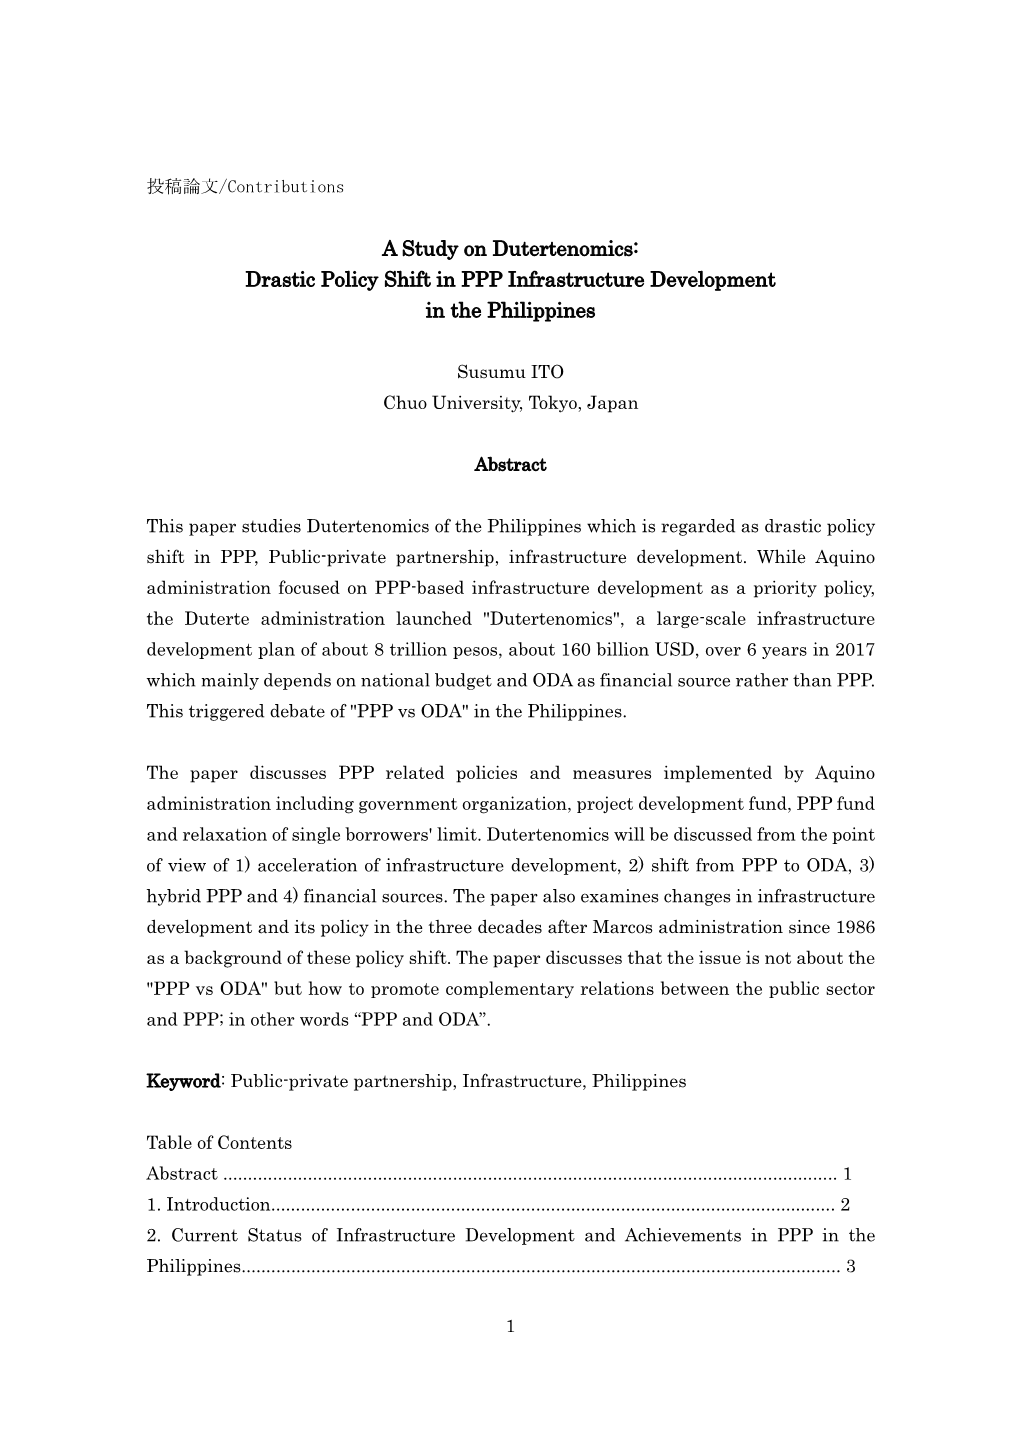 A Study on Dutertenomics: Drastic Policy Shift in PPP Infrastructure Development in the Philippines